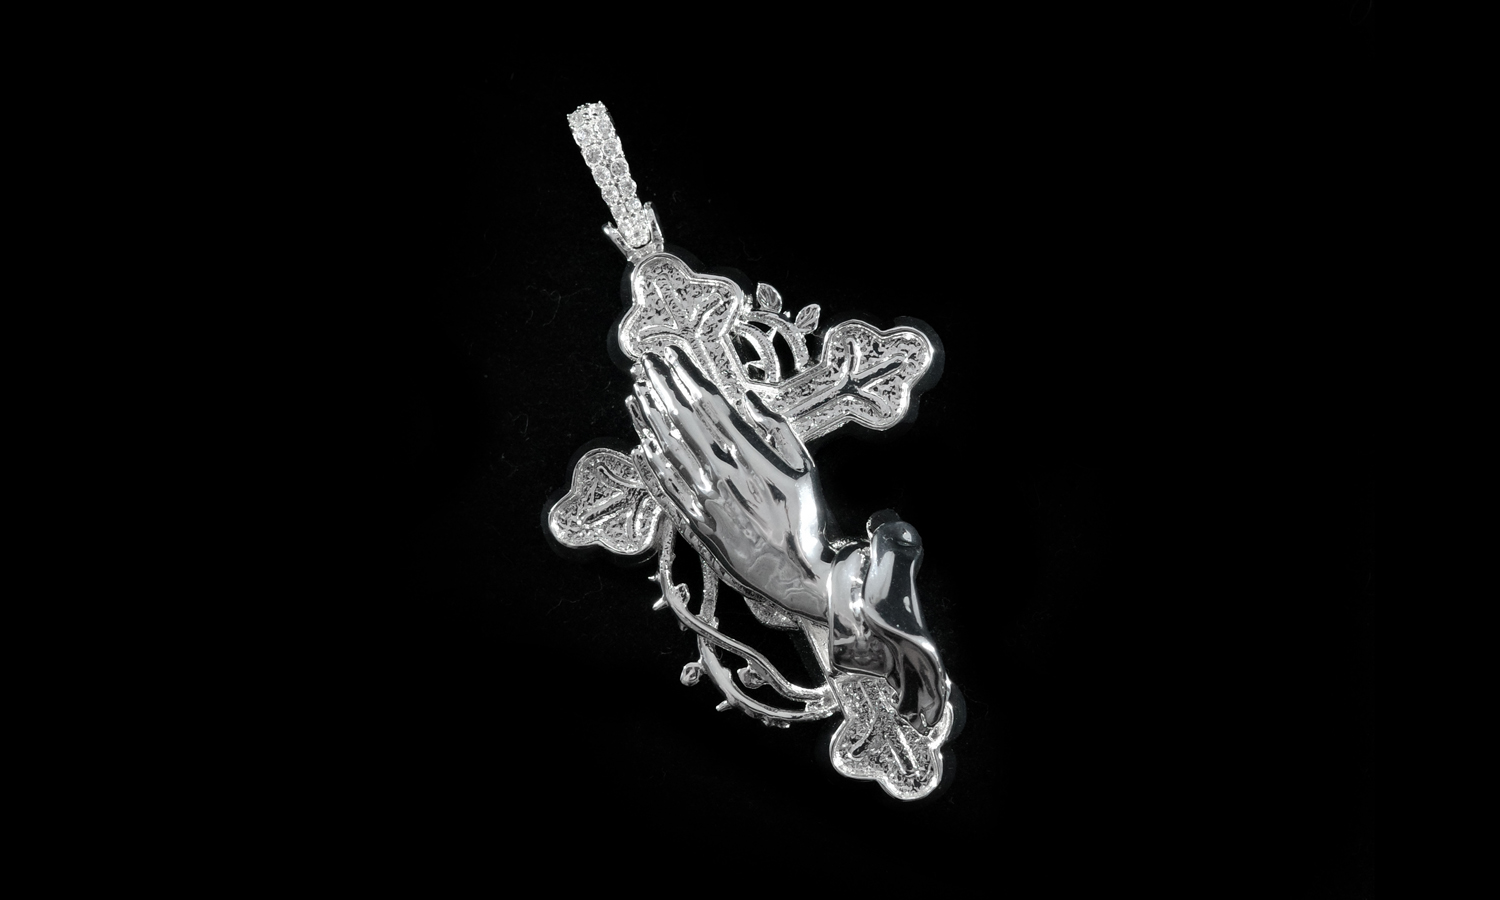 Silver 925 Cross with Praying Hand Pendant Cast from 3D Printing